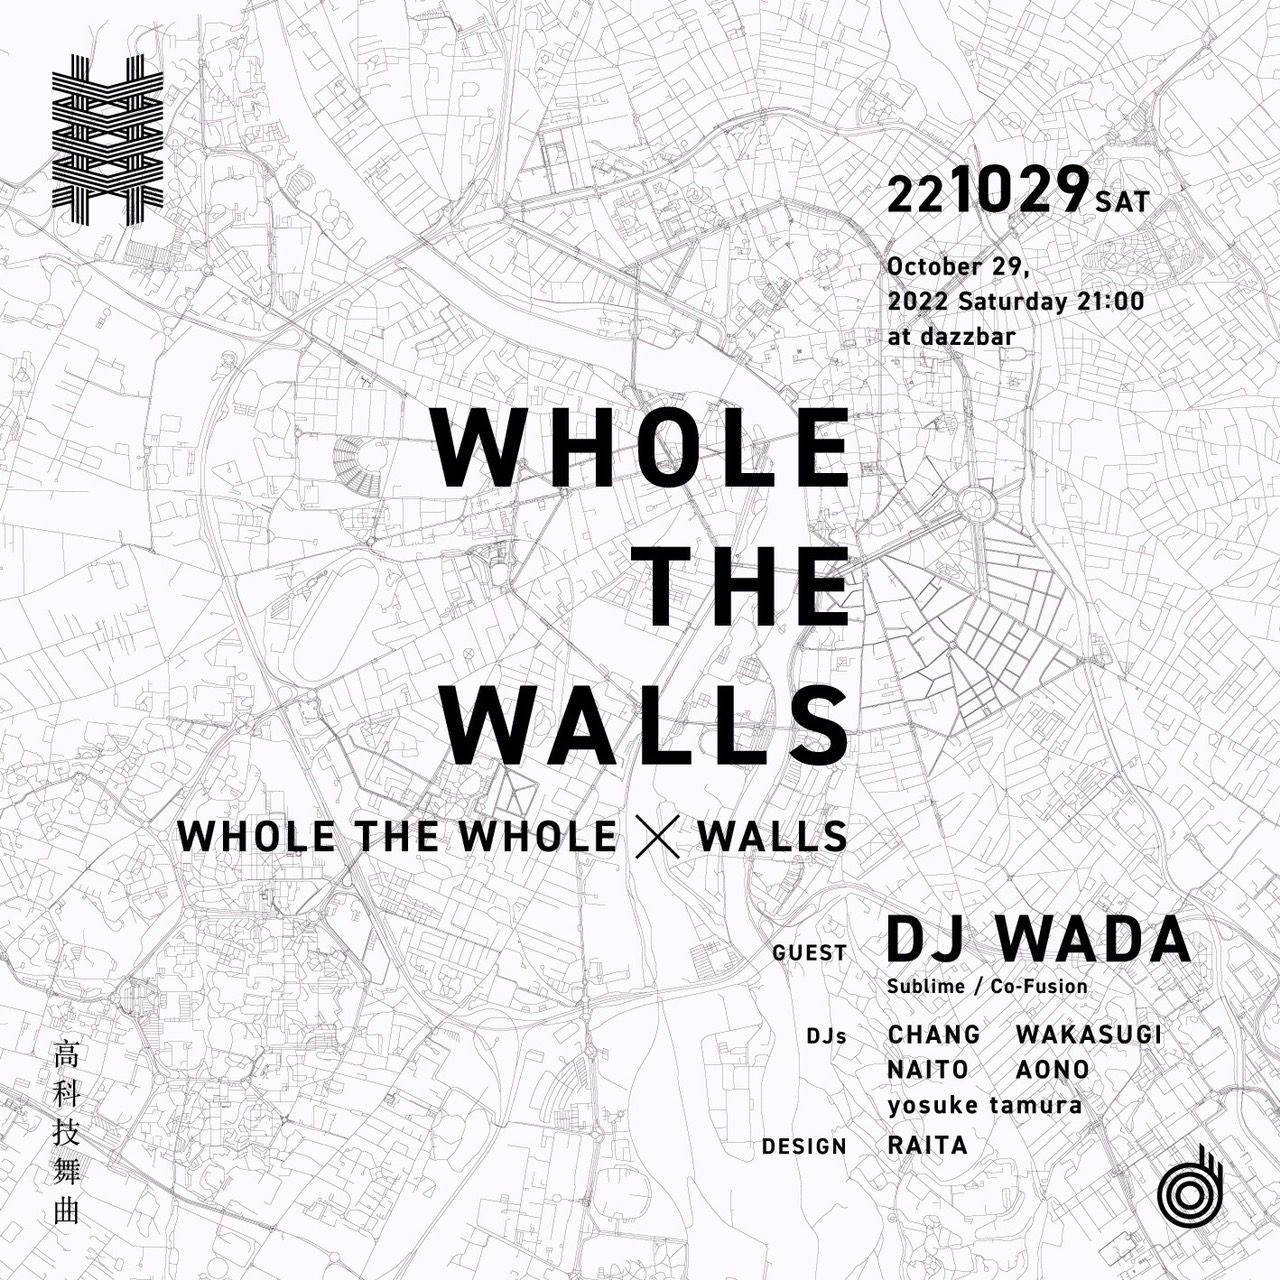 WHOLE THE WALLS